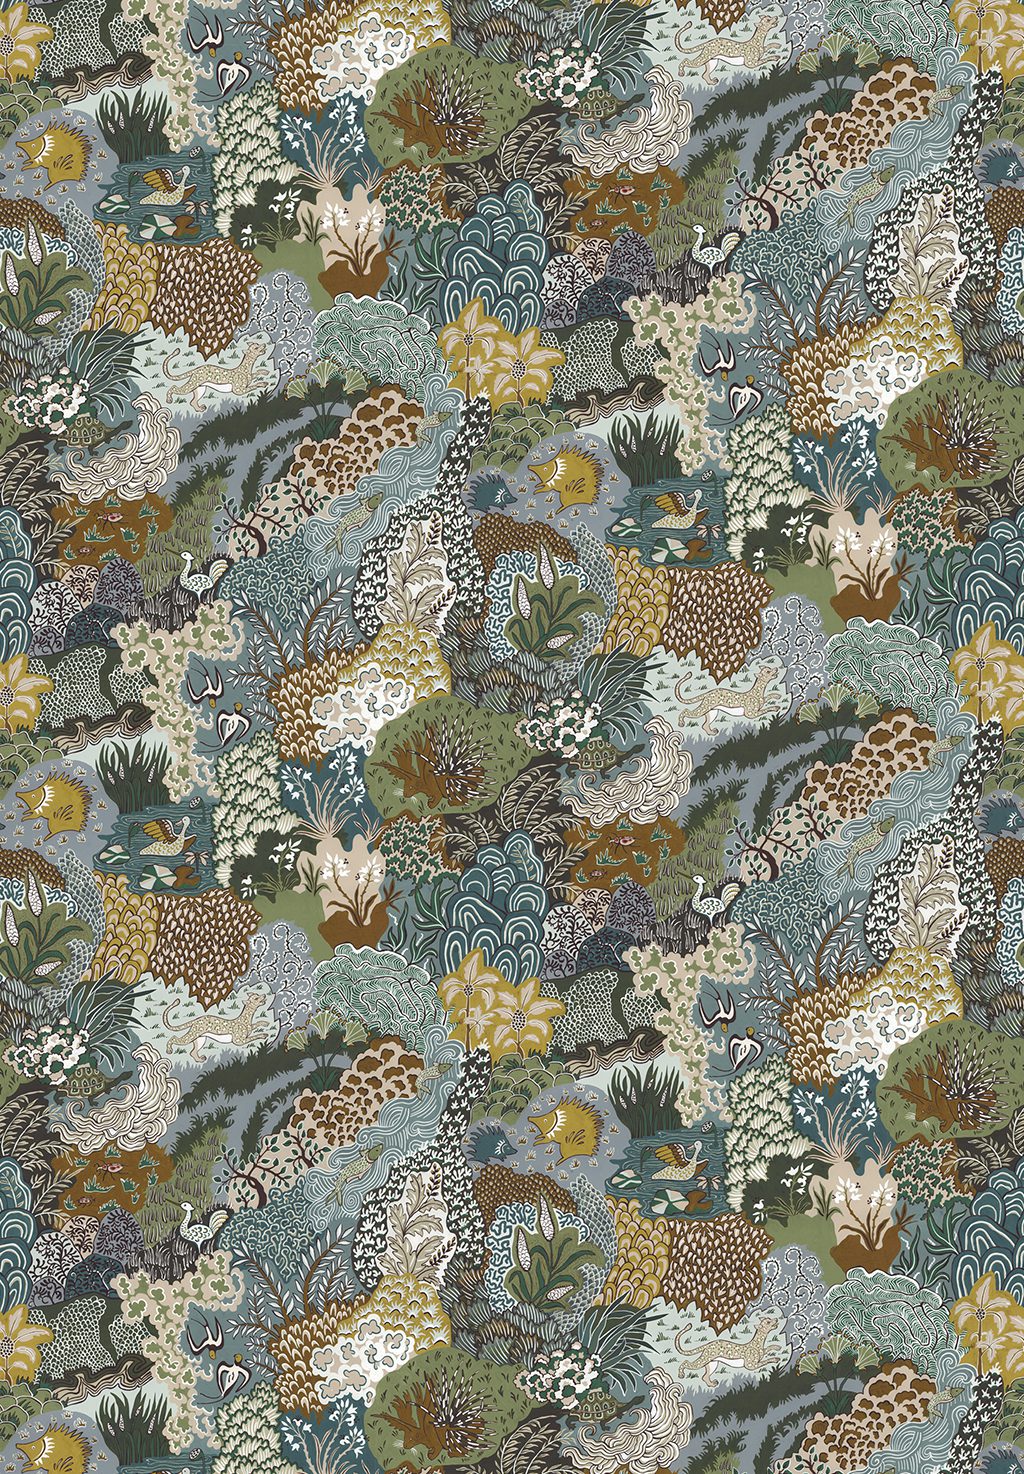 JMW-101911-whimsical-clumps-olive-brown-blue-wallpaper-josephine-munsey-new-patterned-animals-hand-painted-